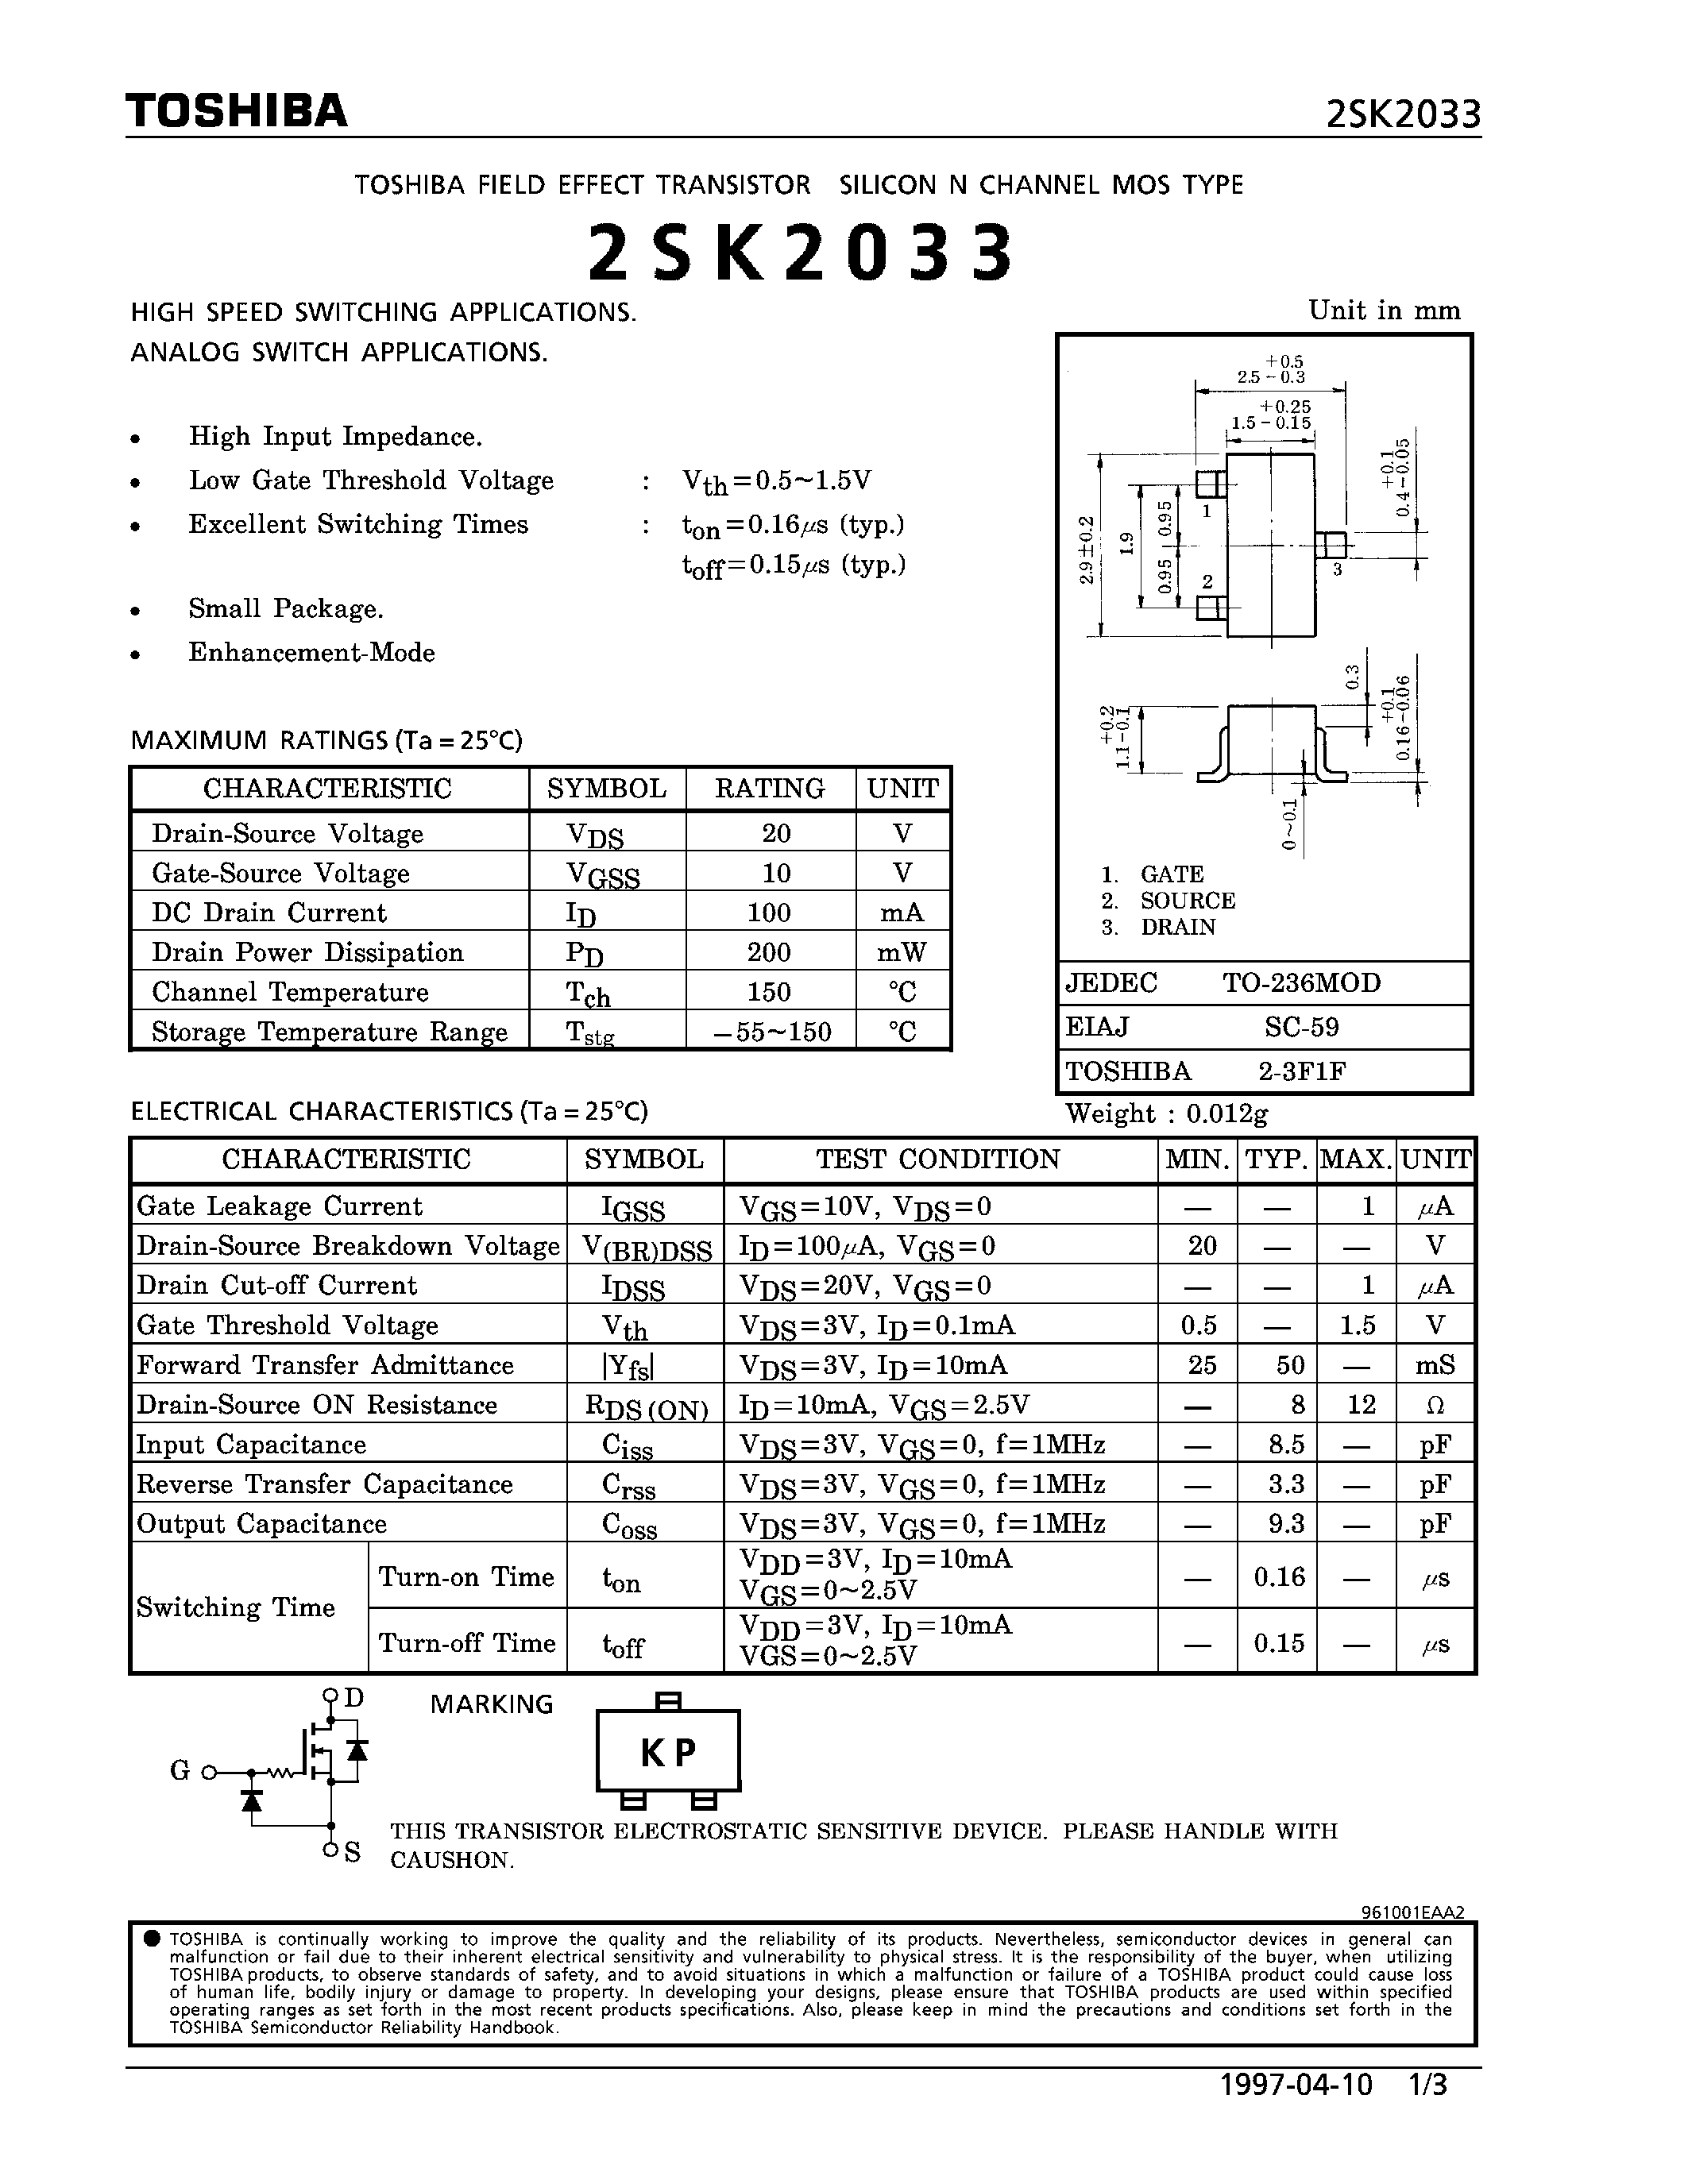 Datasheet 2SK2033 - N CHANNEL MOS TYPE (HIGH SPEED SWITCHING/ ANALOG SWITCH APPLICATIONS) page 1